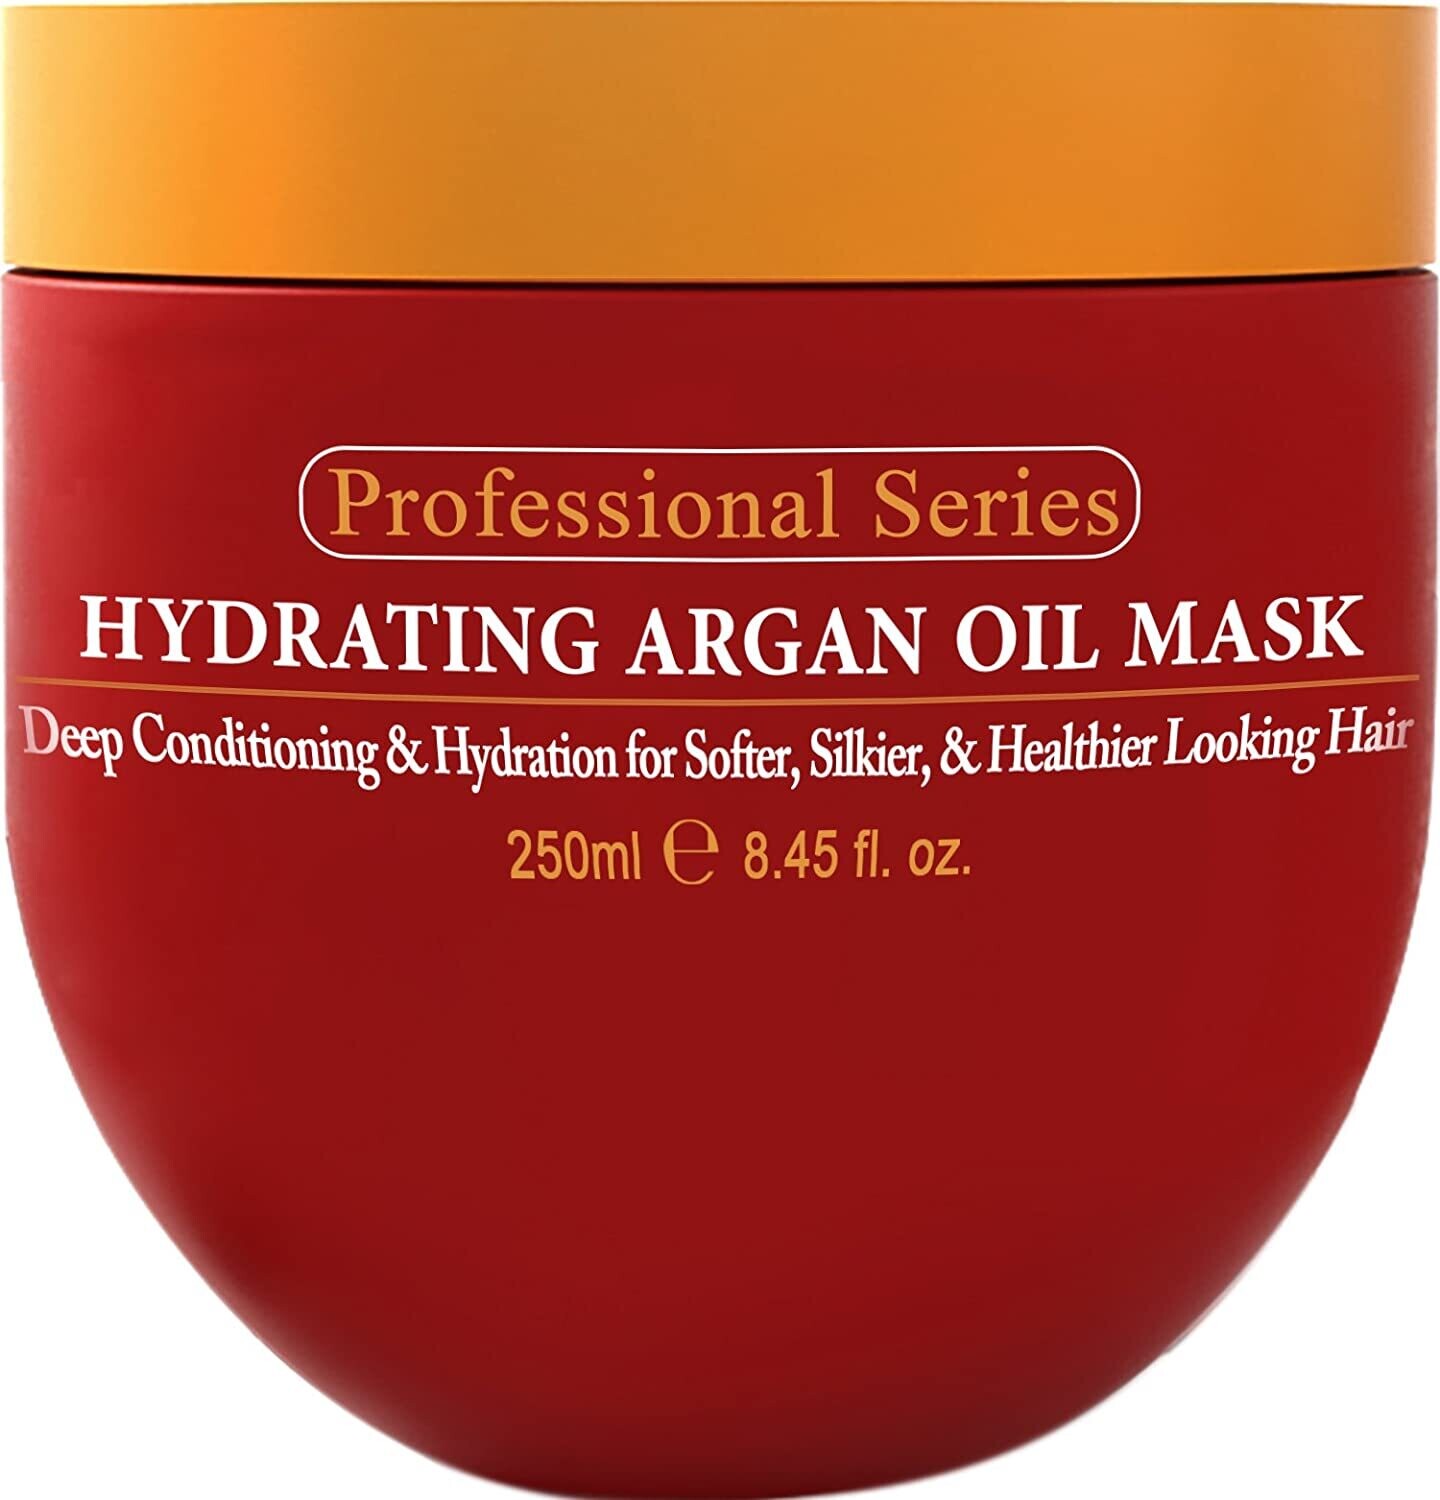 Hair Mask with Hydrating Argan Oil